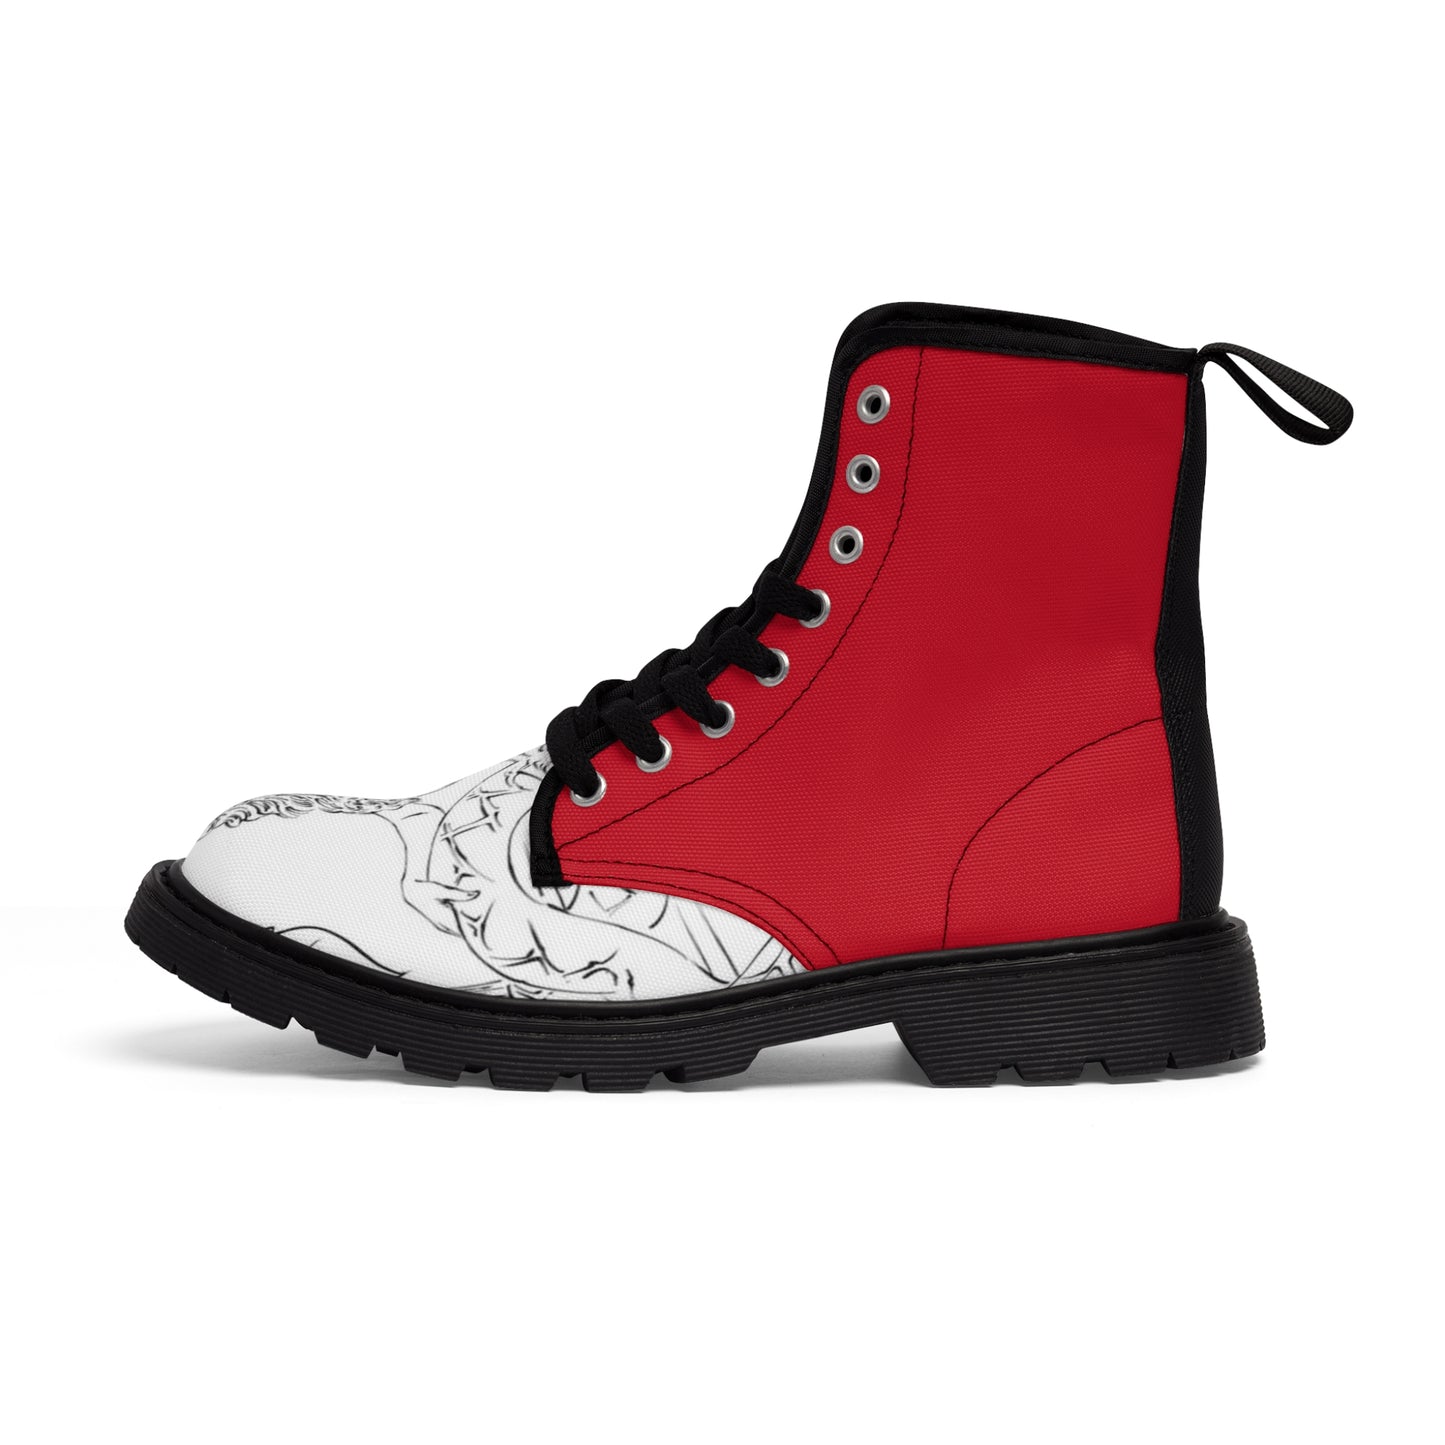 Women's Red and White Canvas Boots